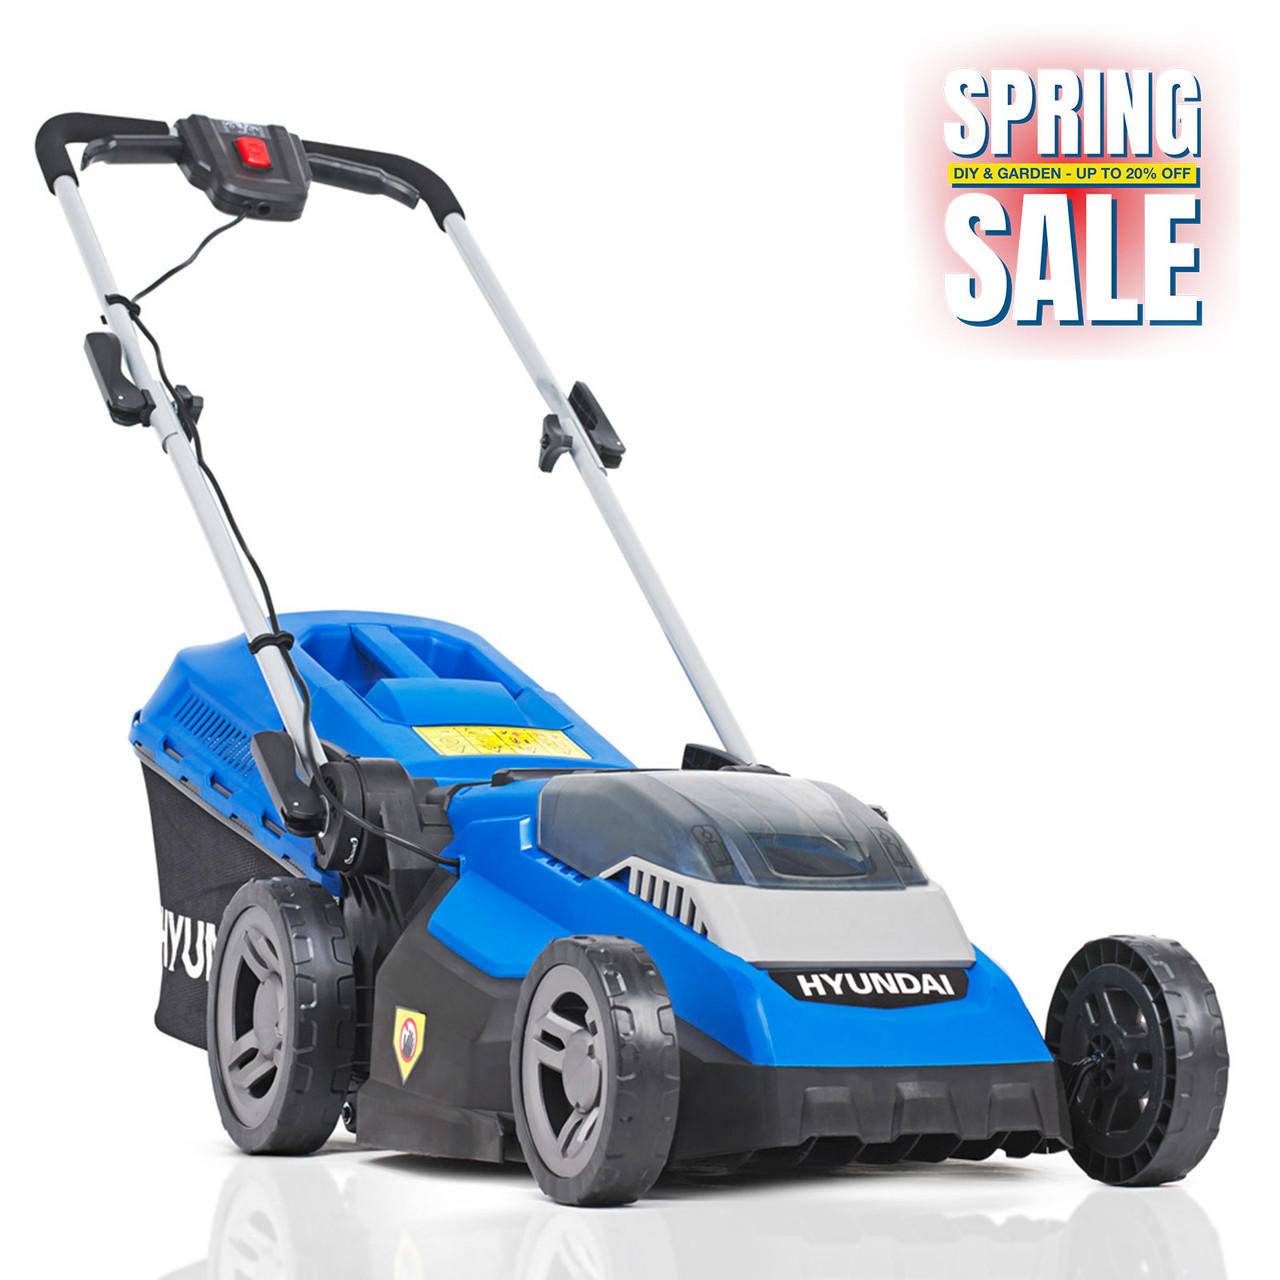 60v cardless lithium-ion battery lawn mower